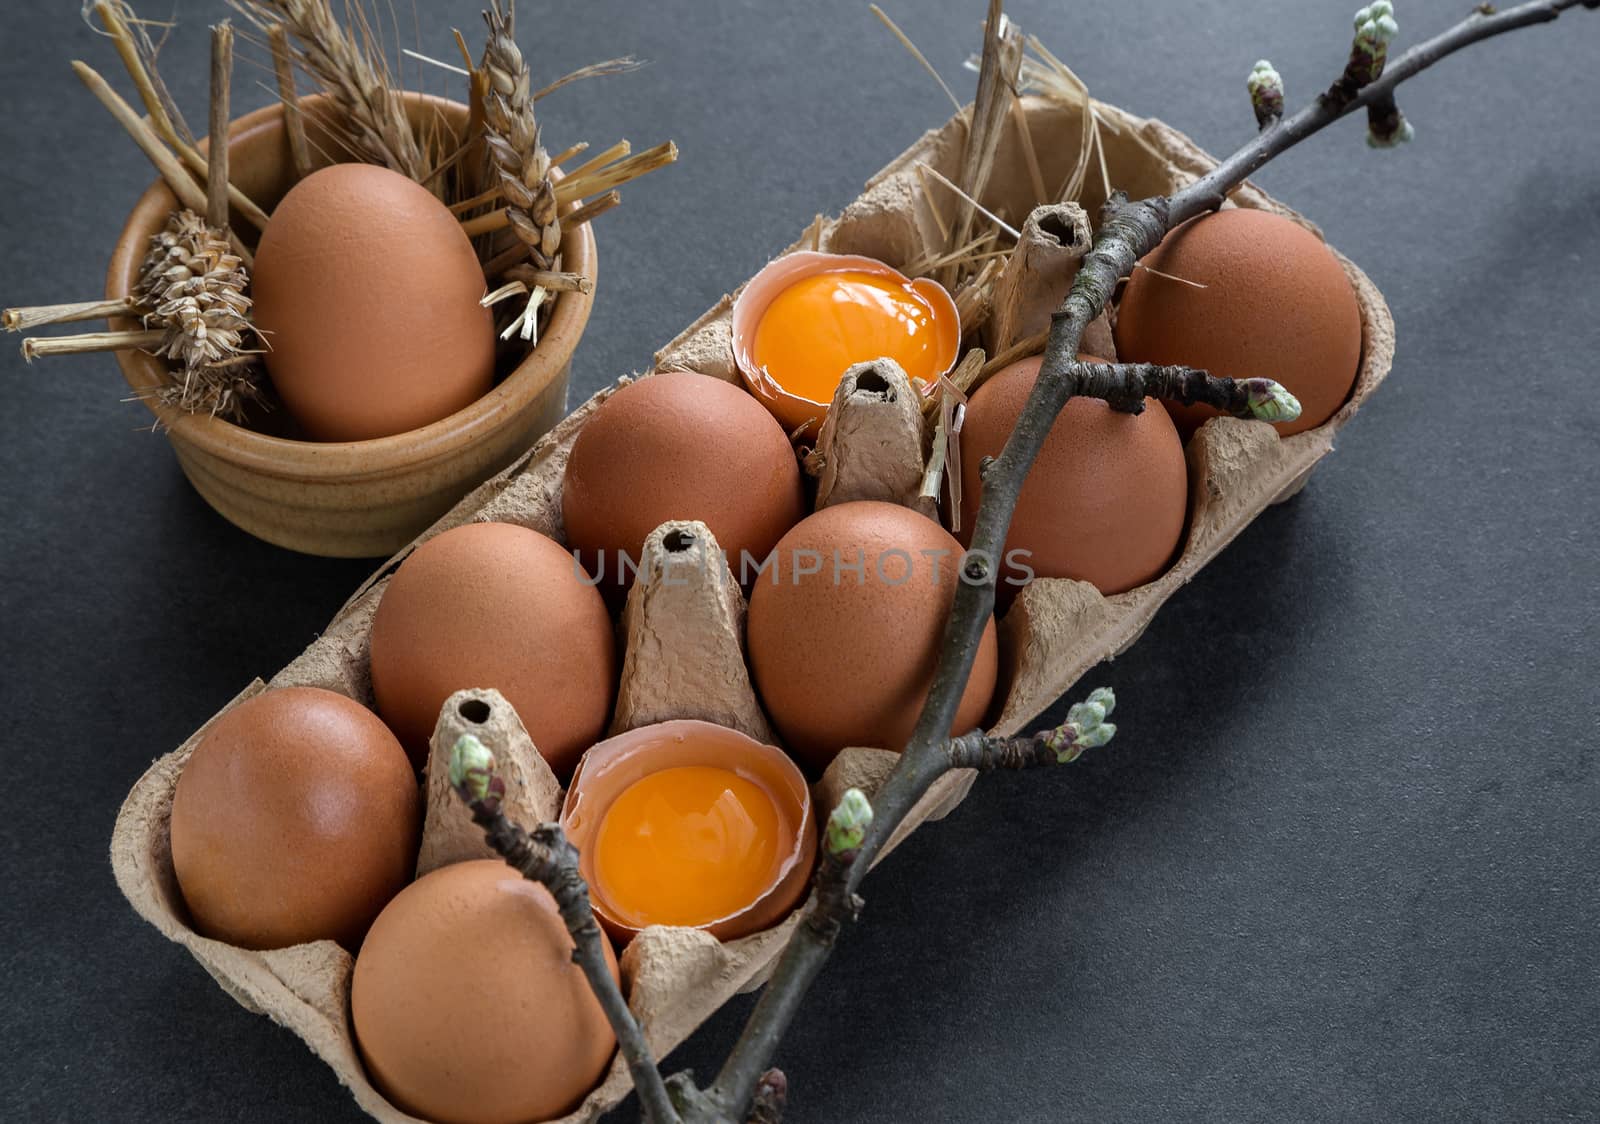 chicken eggs in a cardboard grate on a gray background